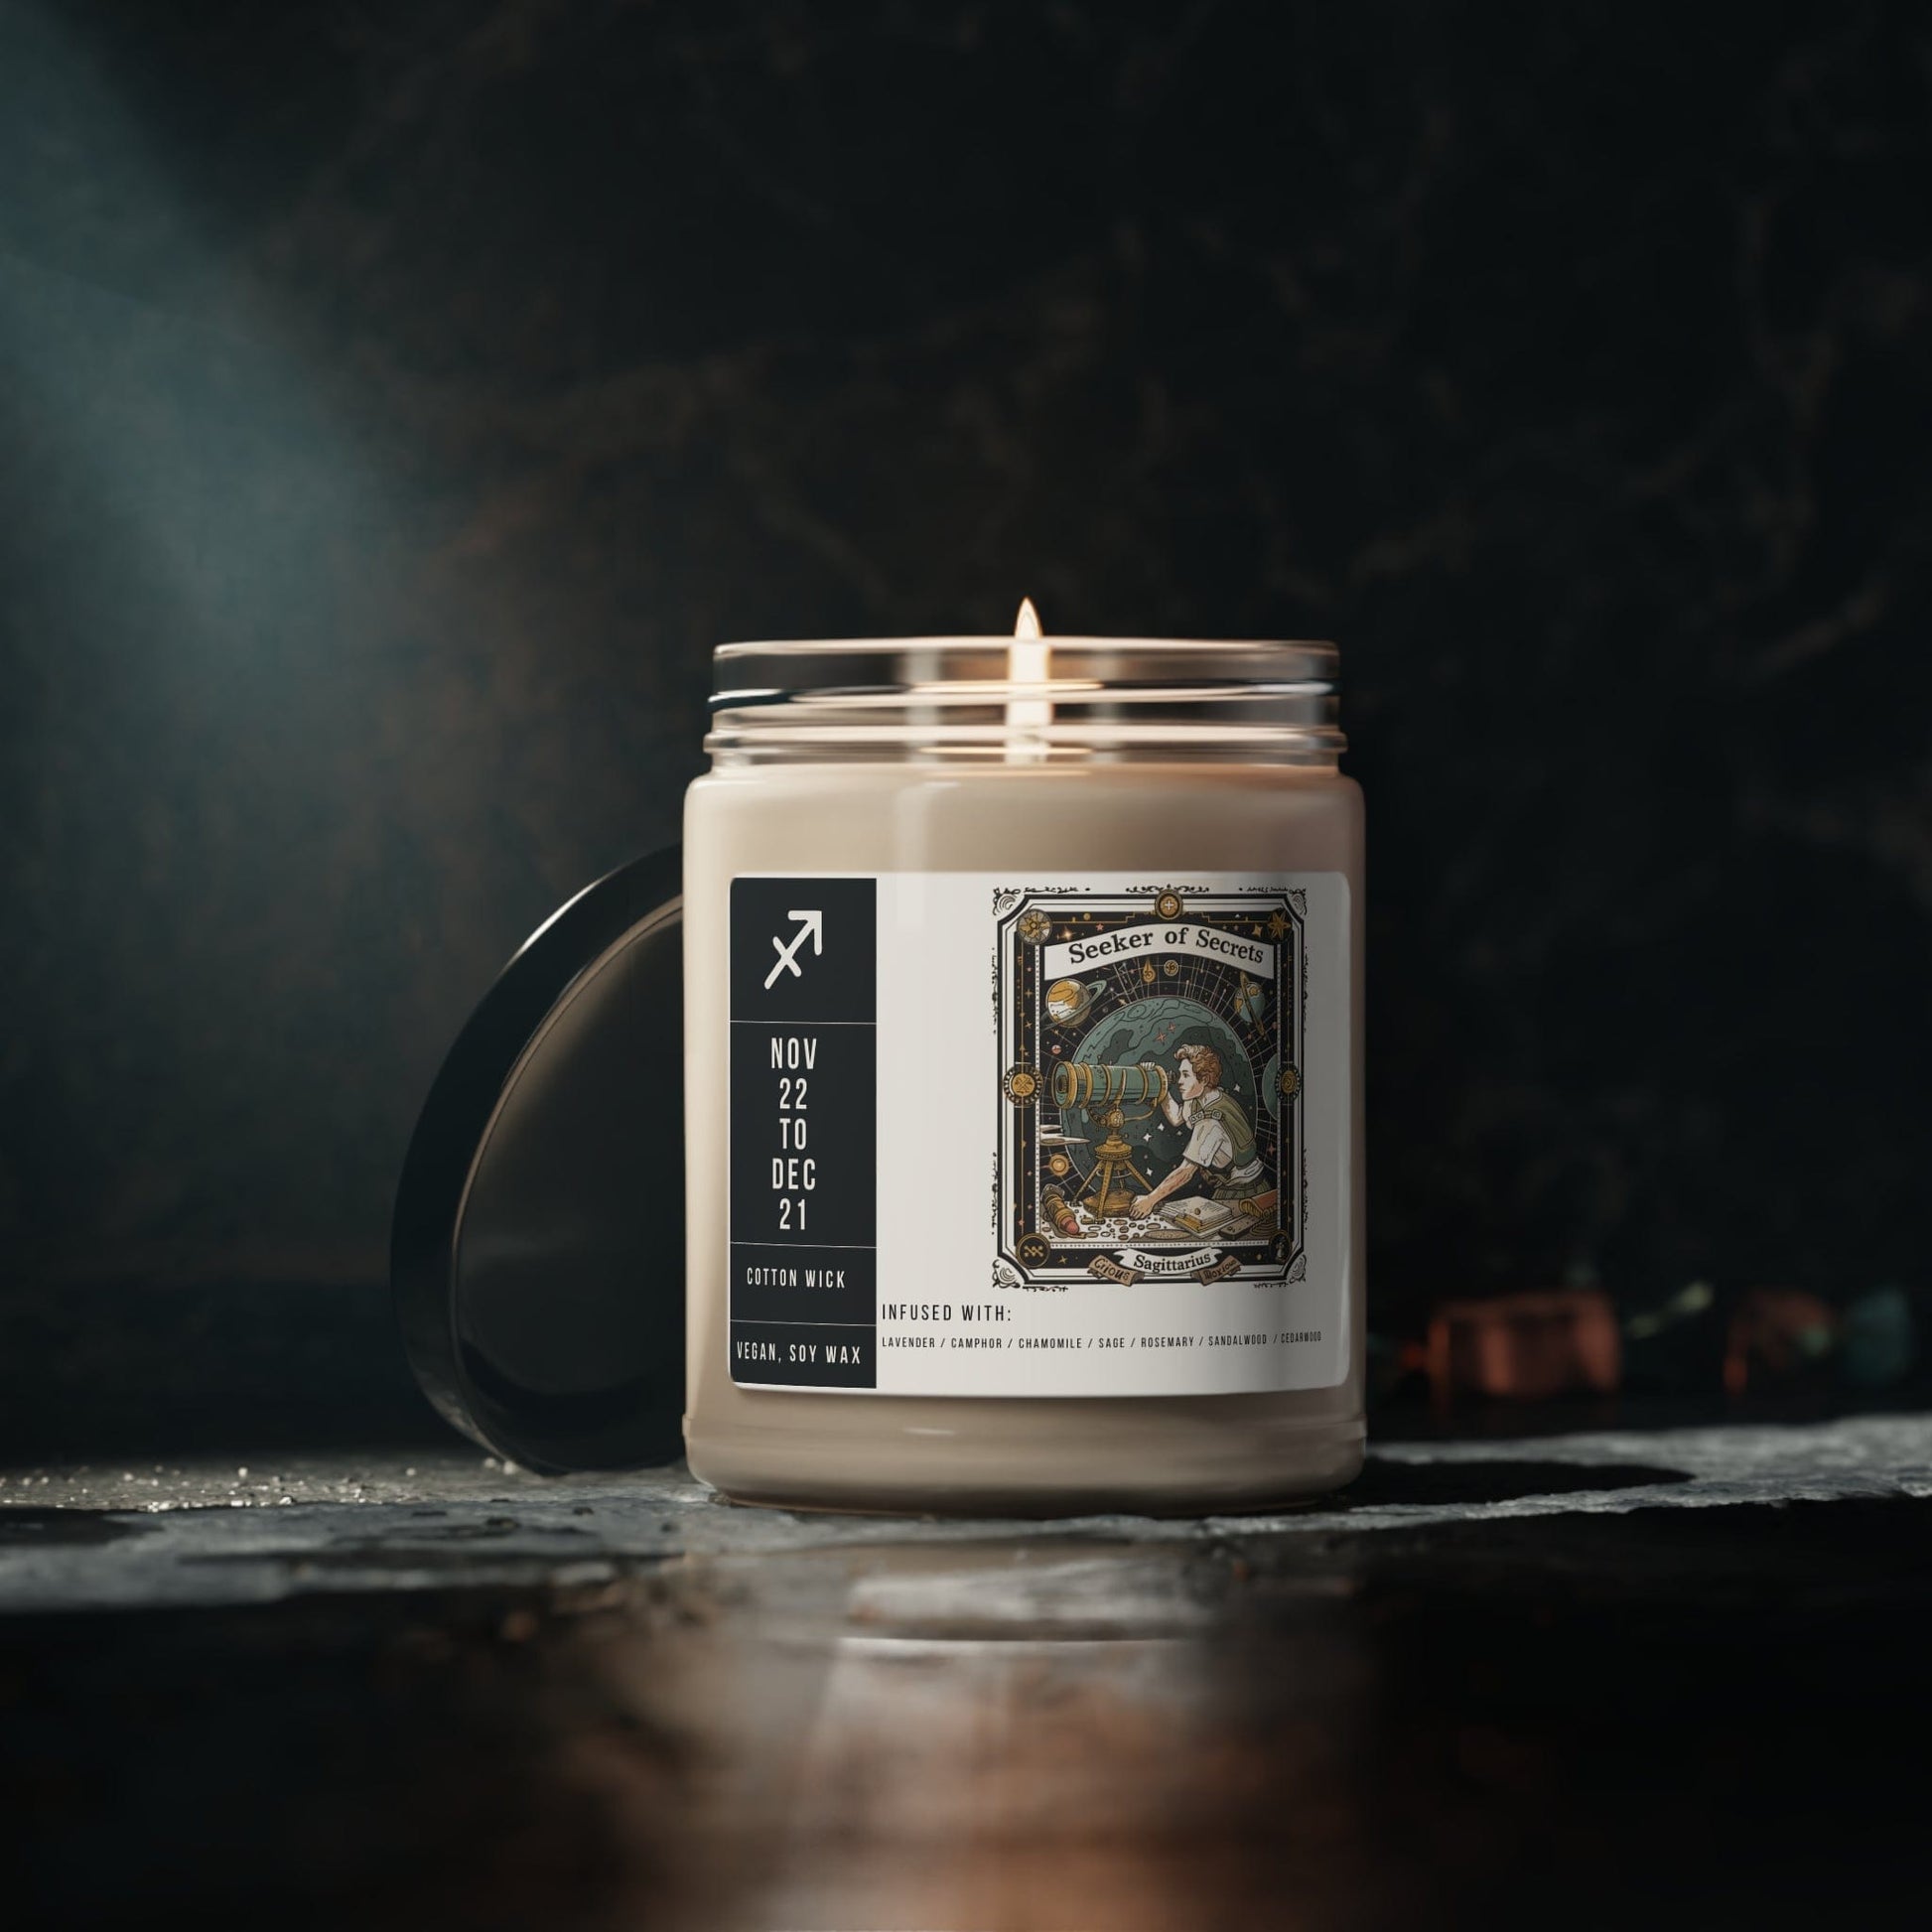 Home Decor Sagittarius Zodiac Scented Soy Candle Collection – Horizon of the Archer